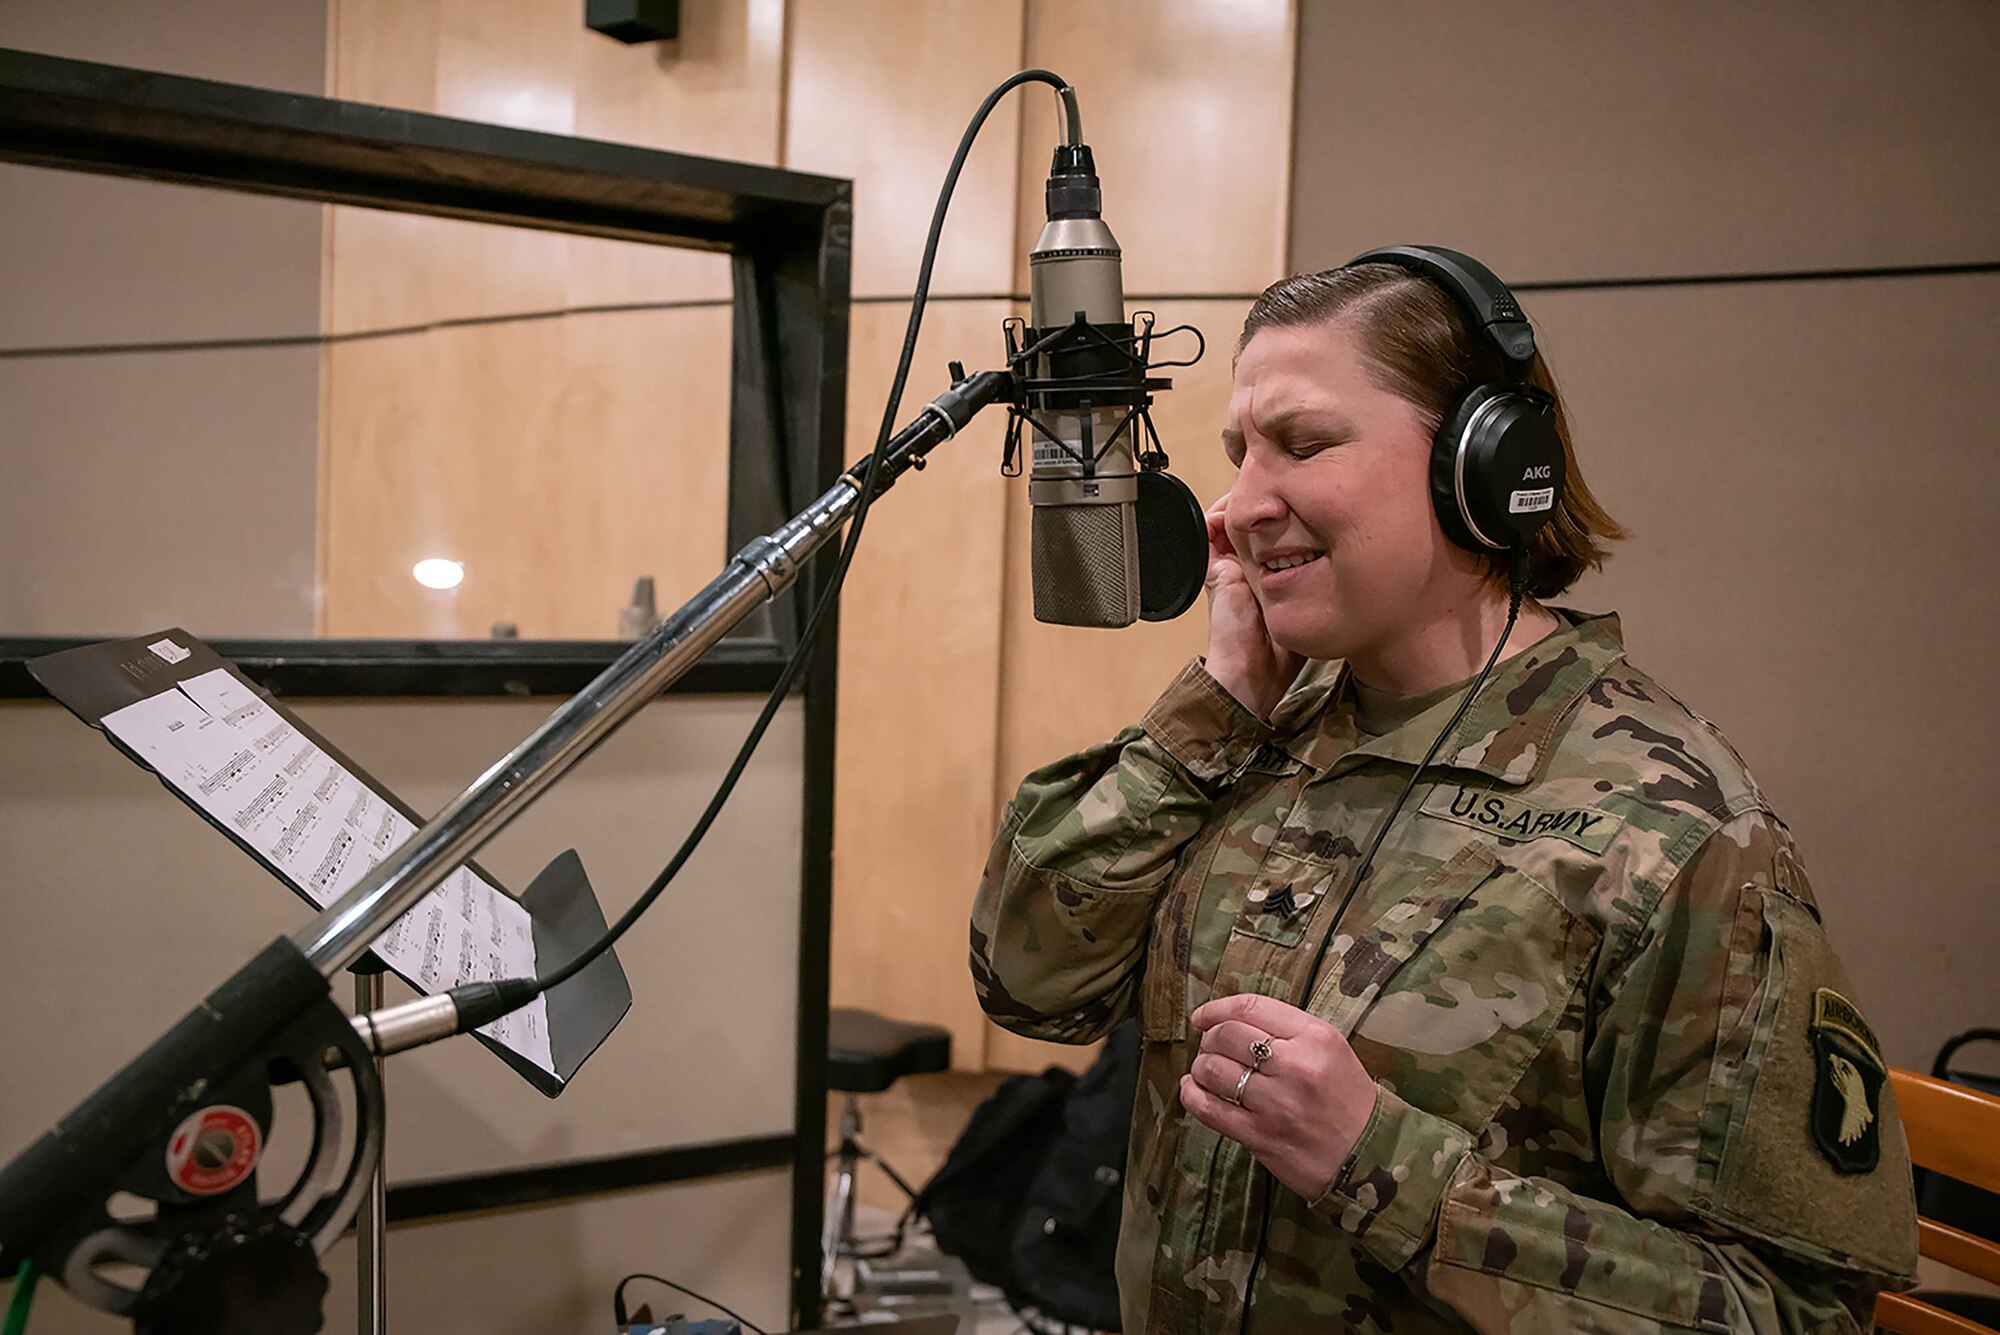 Sgt. Katherine Bolar, a vocalist assigned to the 101st Airborne Band, sings "Light of a Gold Star" at a Nashville based recording studio